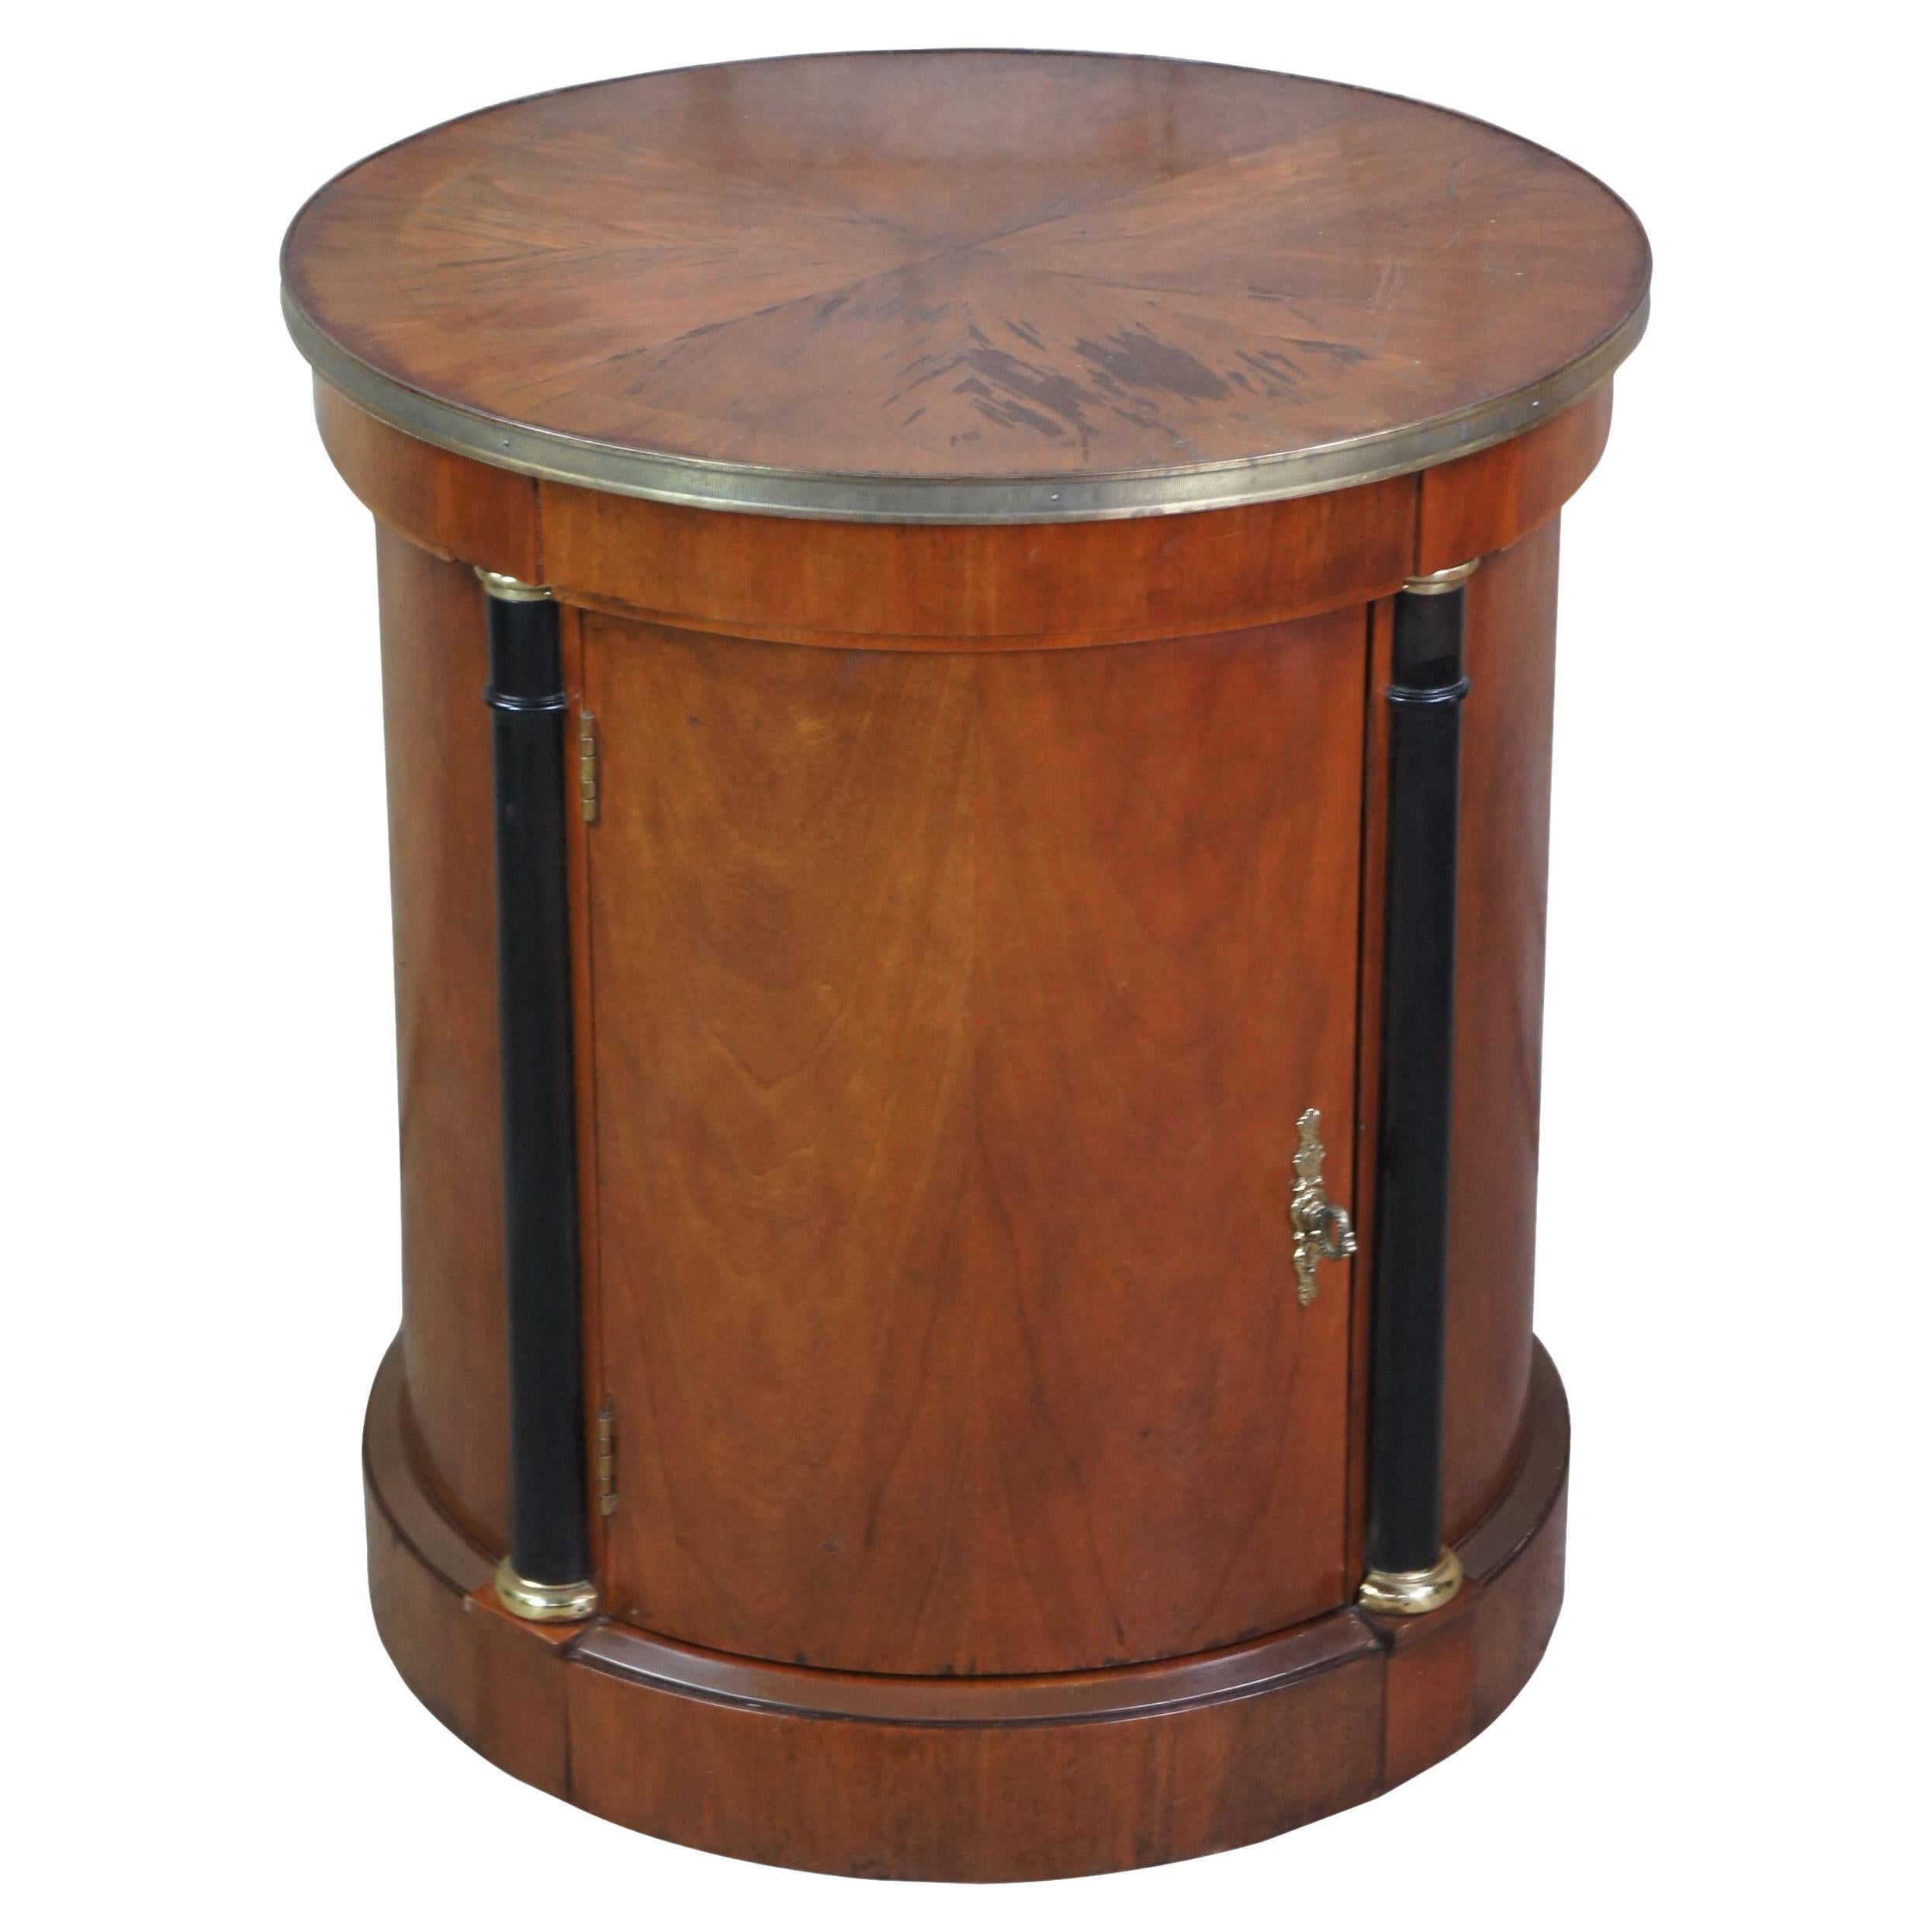 Neoclassical French Empire Round Cherry Somno Drum Table Nightstand Cabinet Vtg